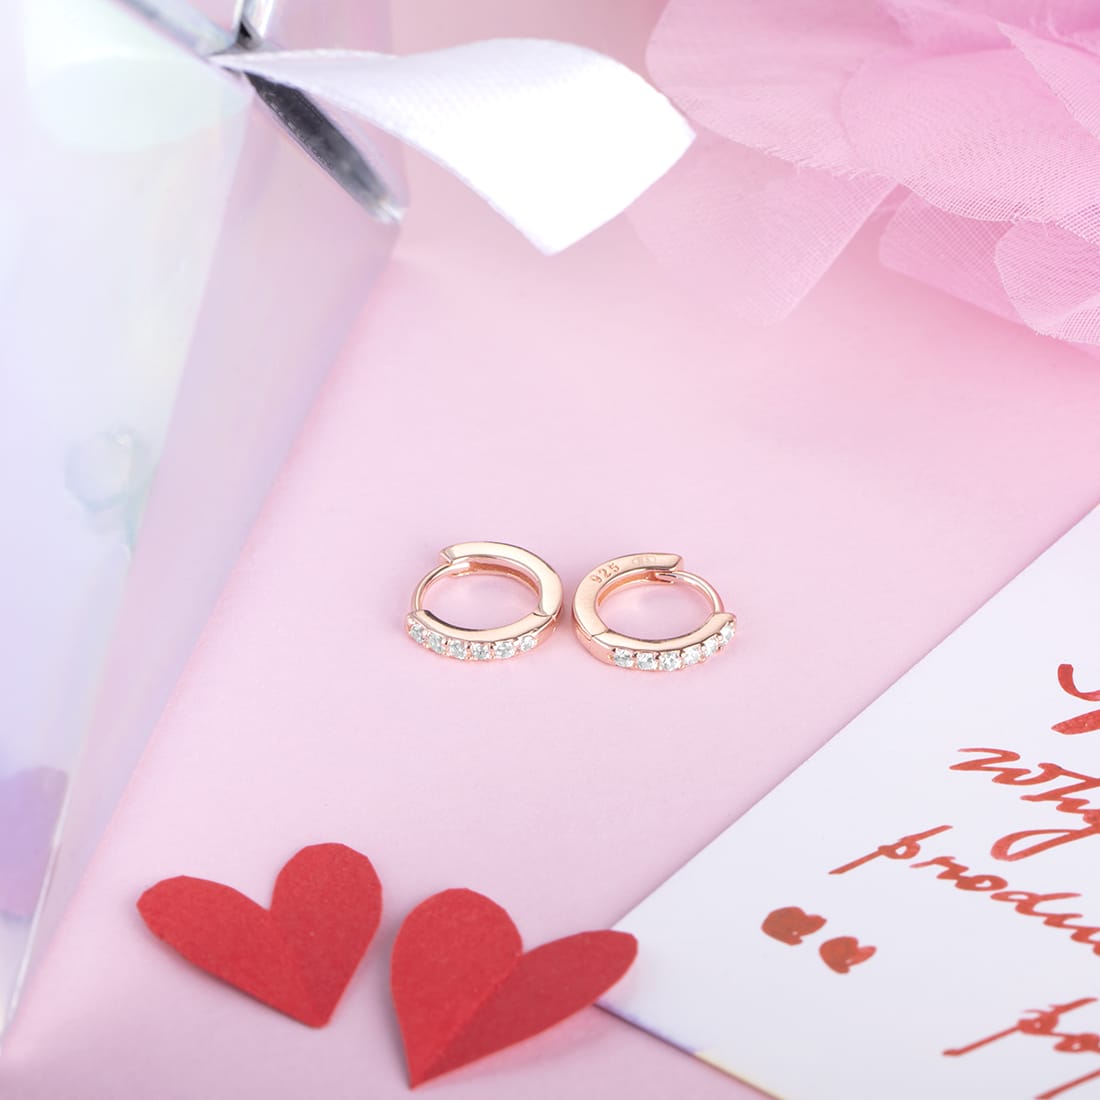 Love Moment Hoop 925 Silver Earrings - Valentines Edition With Gift Box